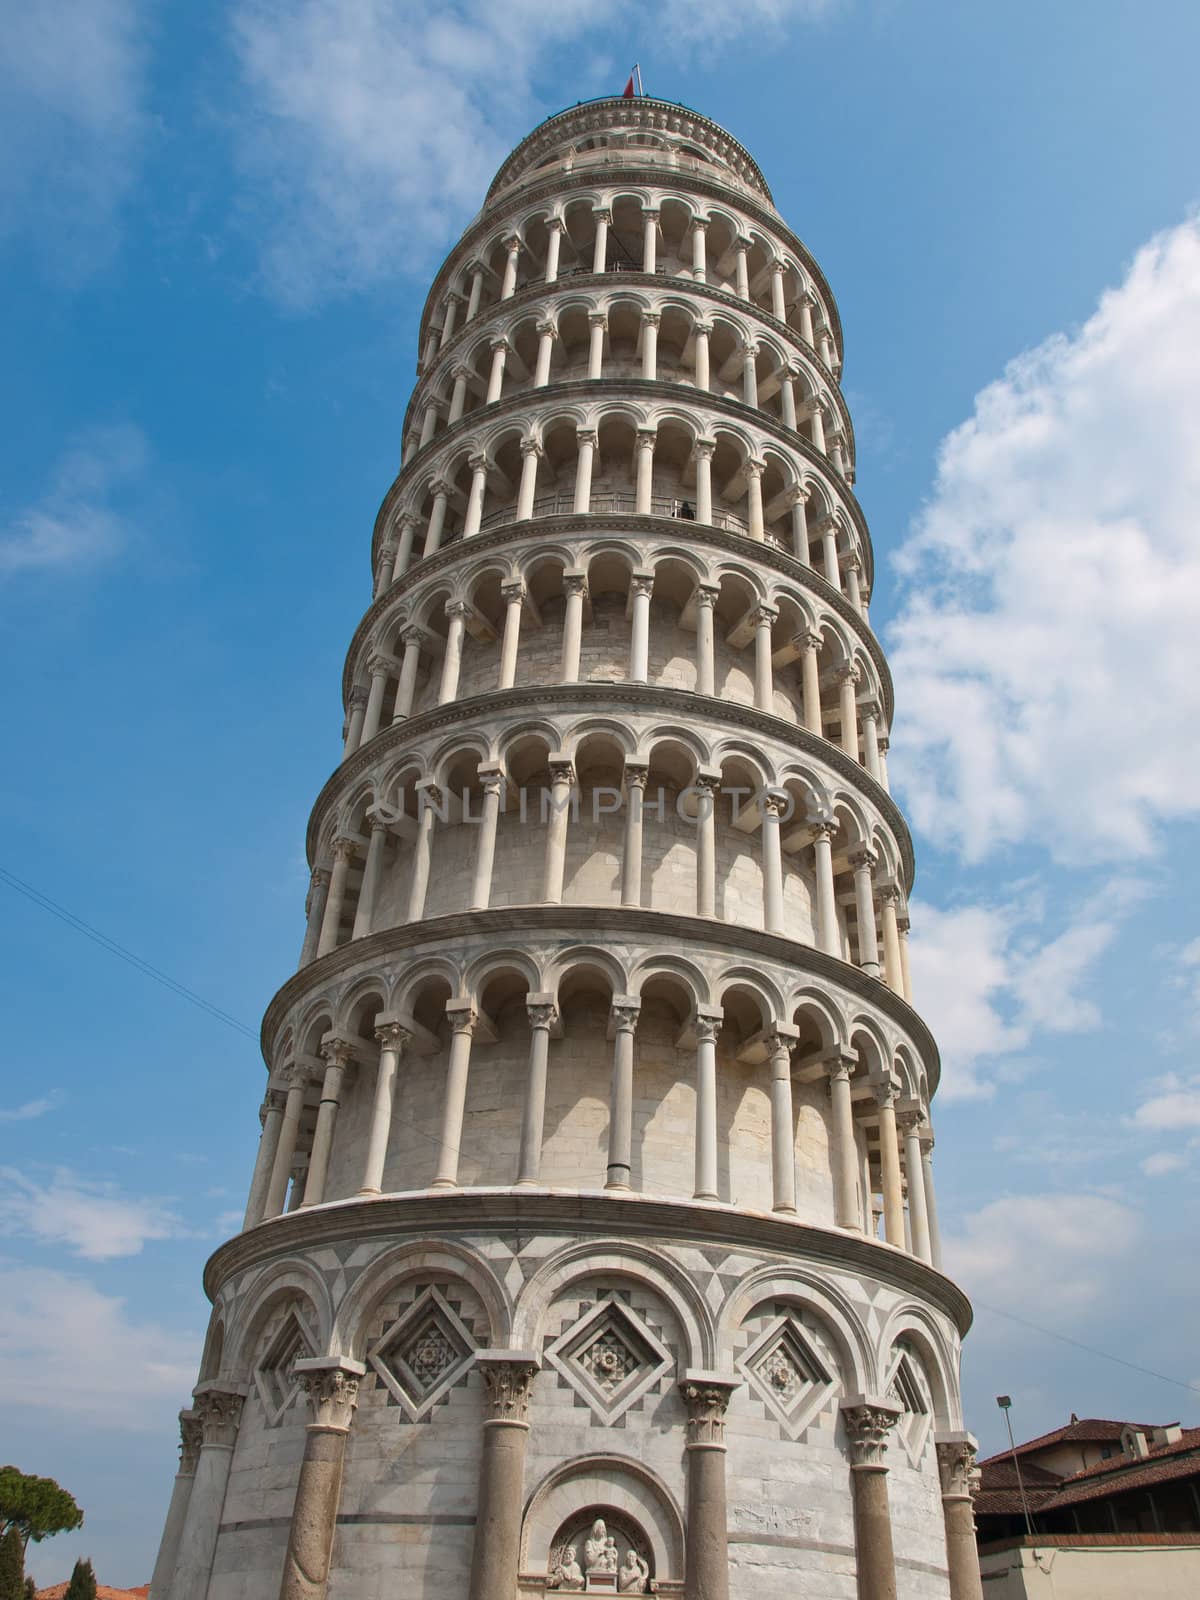 famouse tower in piza Italy